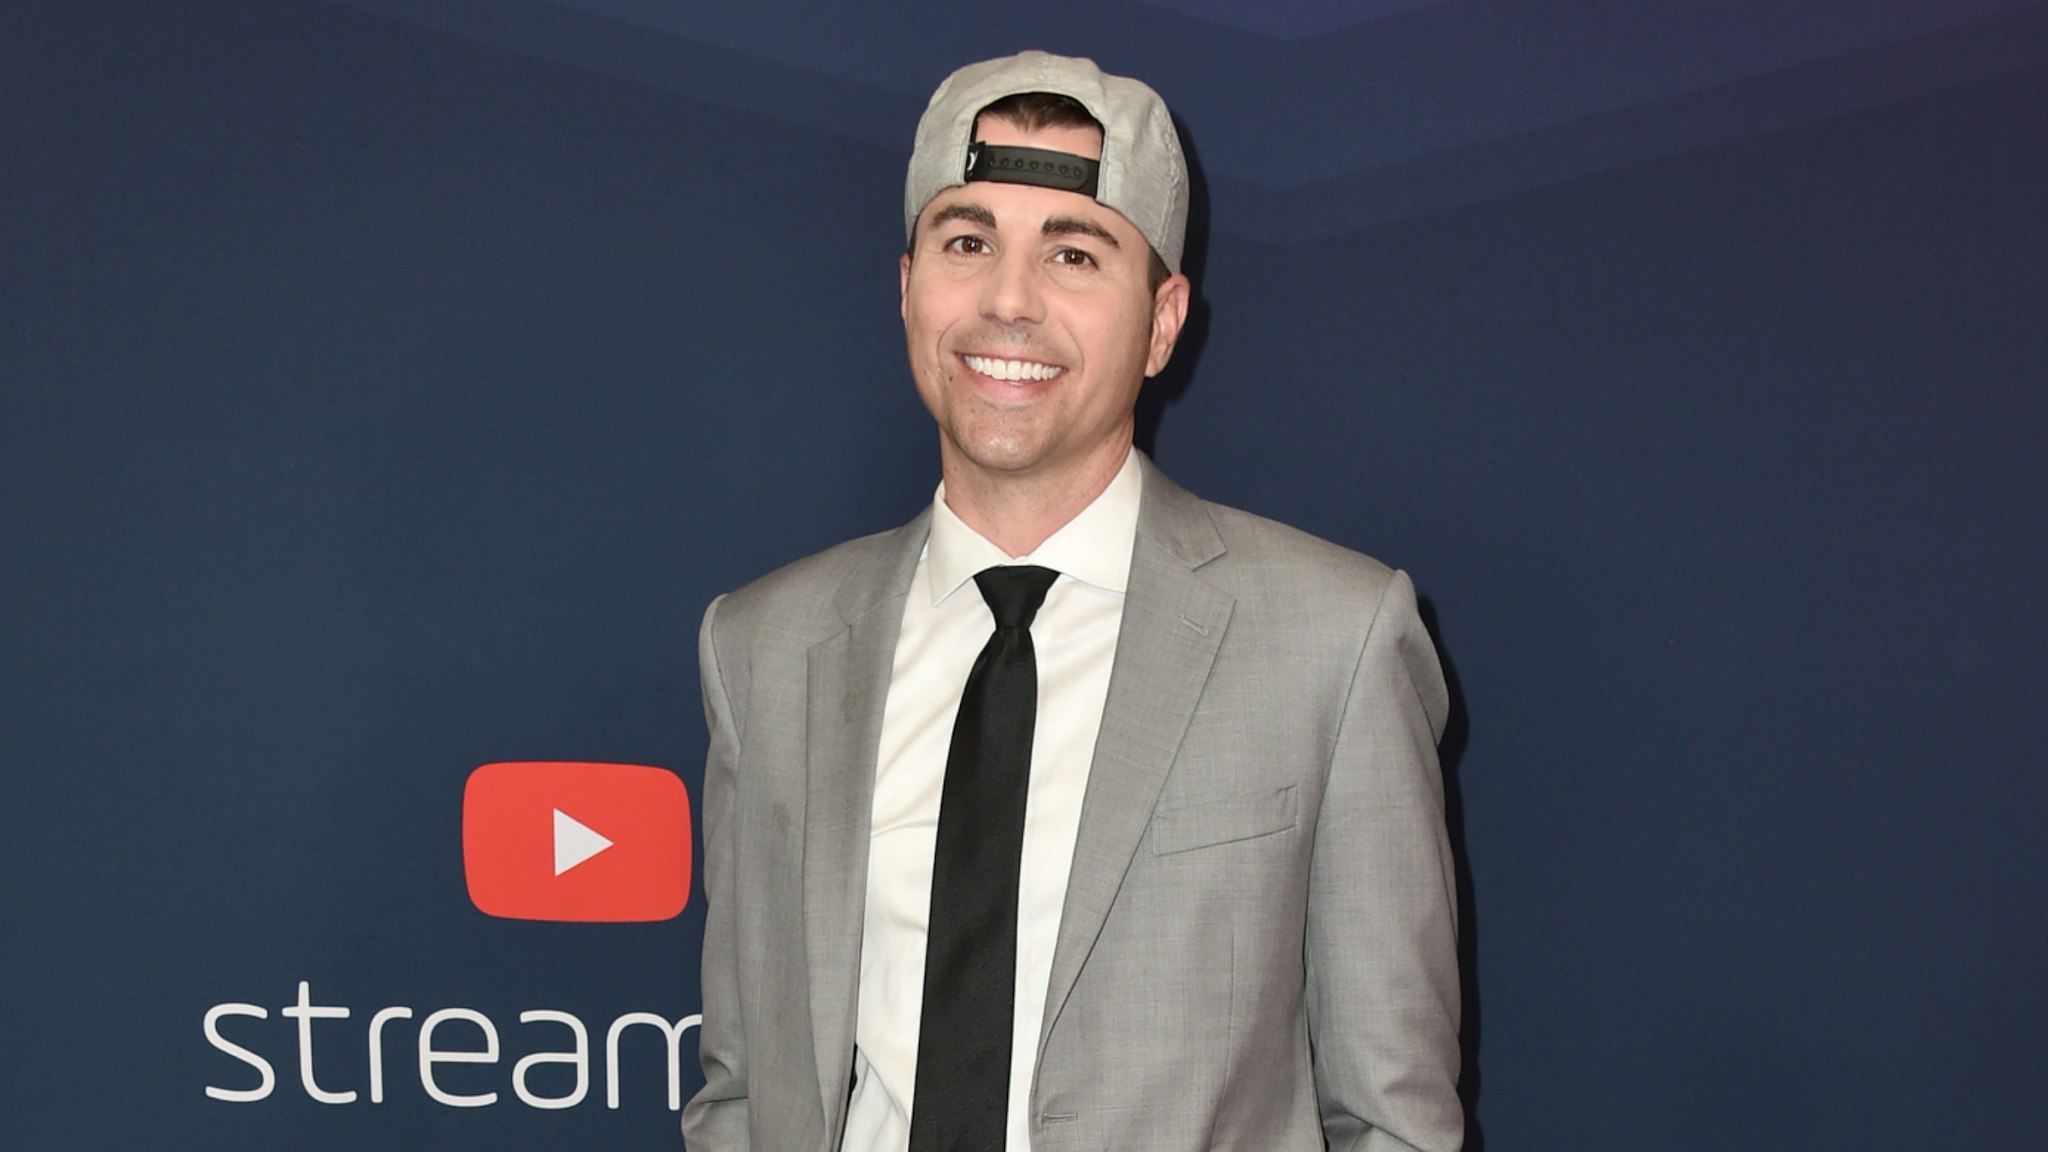 Mark Rober attends The 9th Annual Streamy Awards on December 13, 2019 in Los Angeles, California.